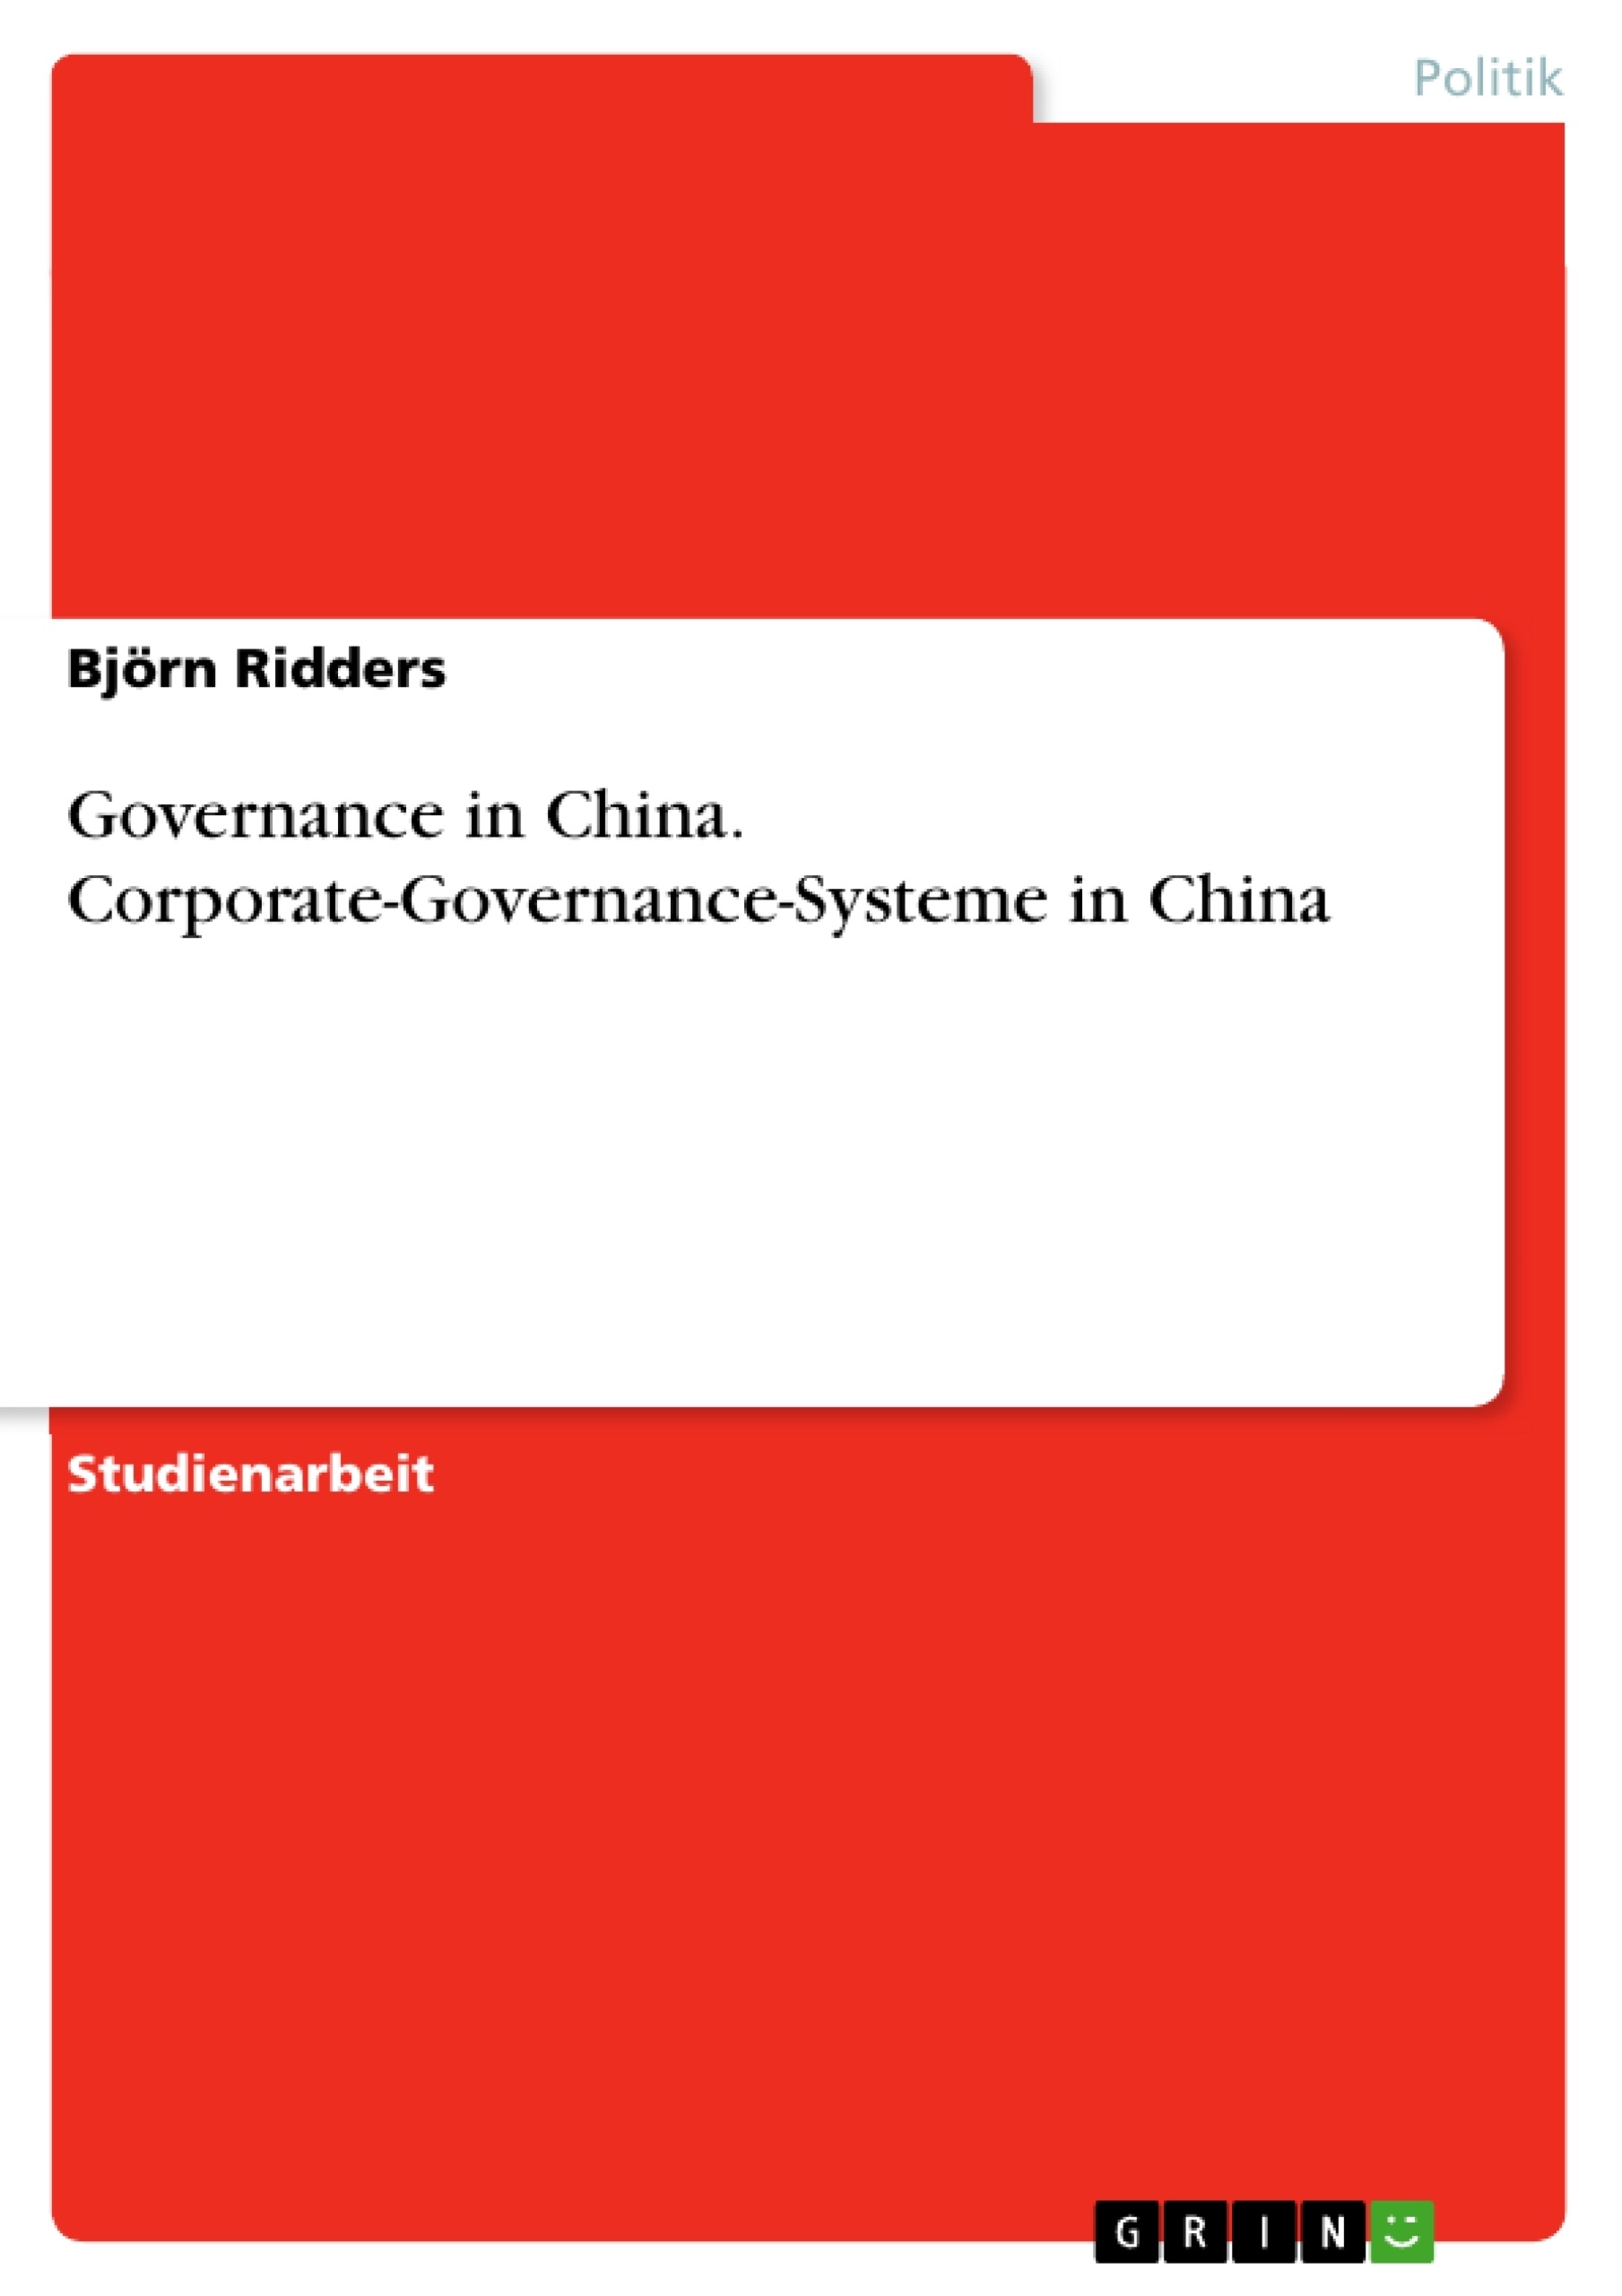 Titel: Governance in China. Corporate-Governance-Systeme in China